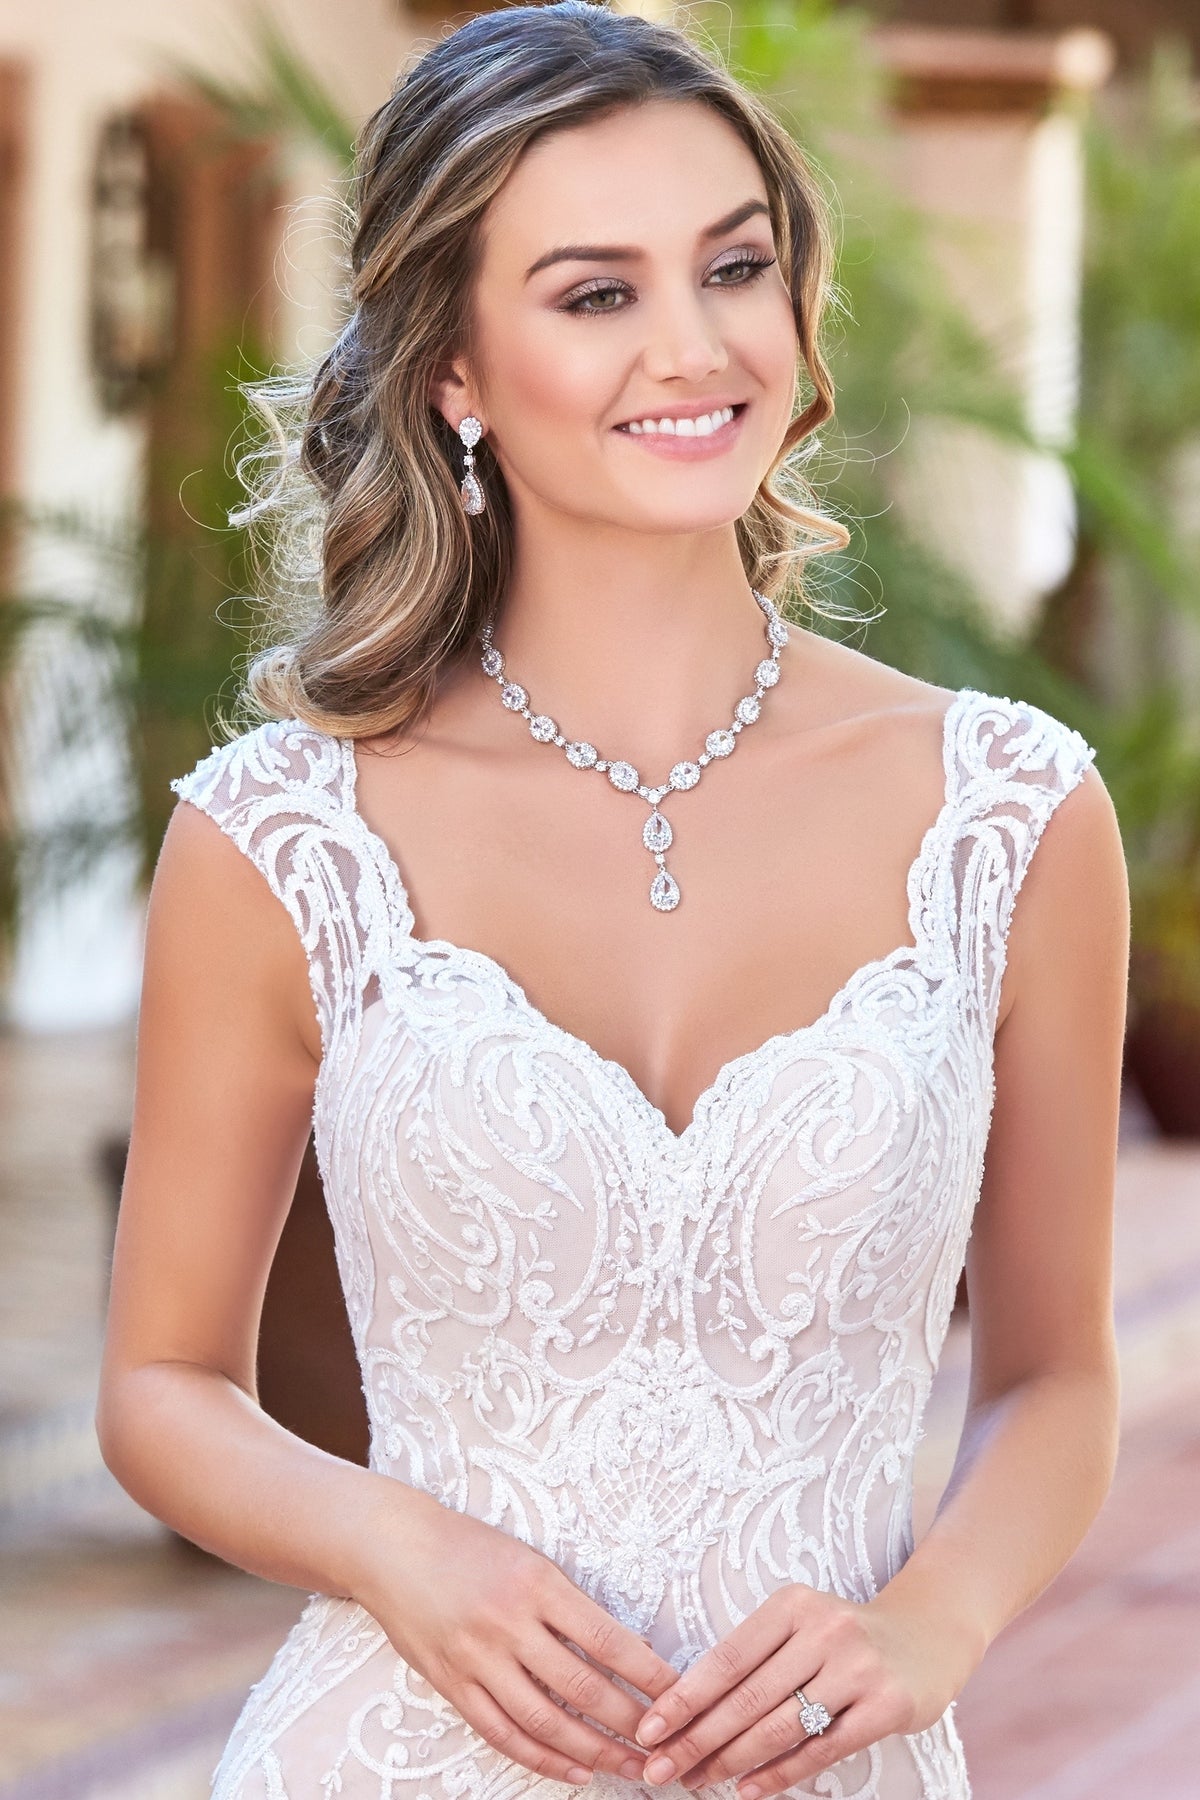 Dress to Impress: Selecting the Best Necklace for a Sweetheart Necklin